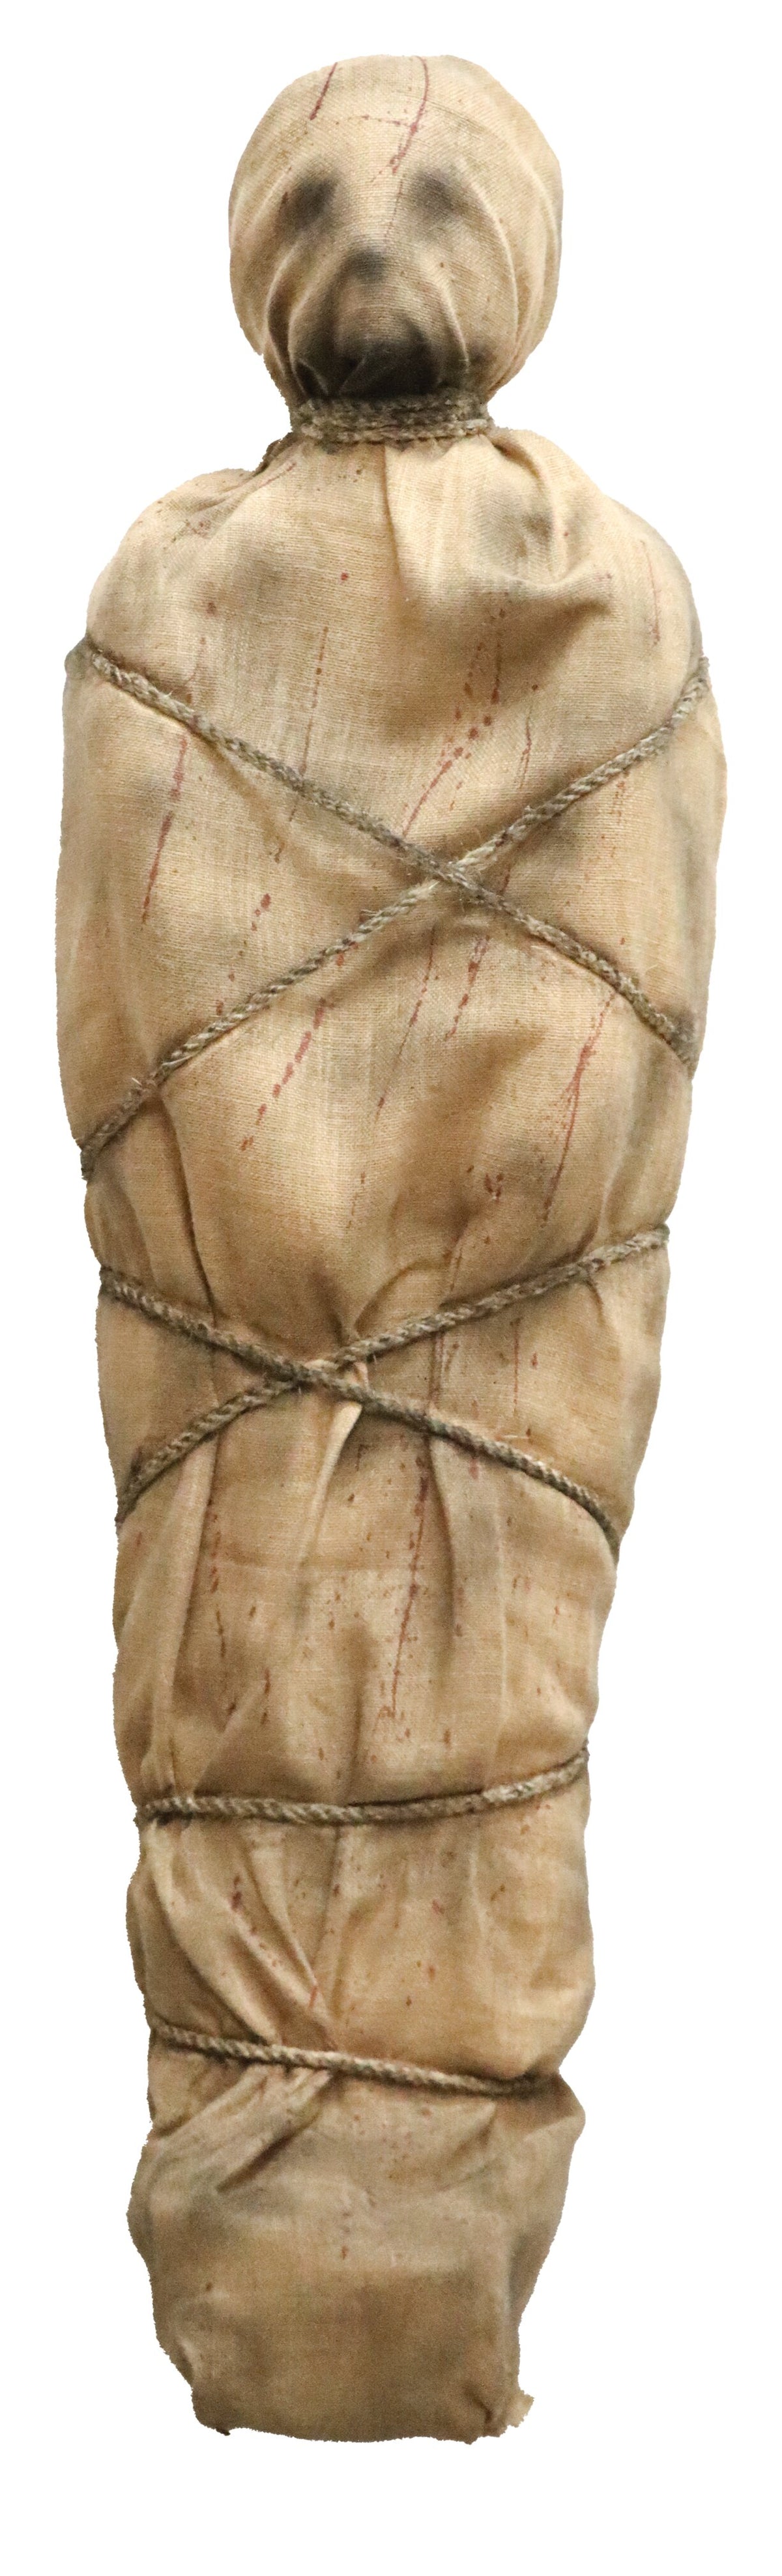 Wrapped Up Dead Body Prop